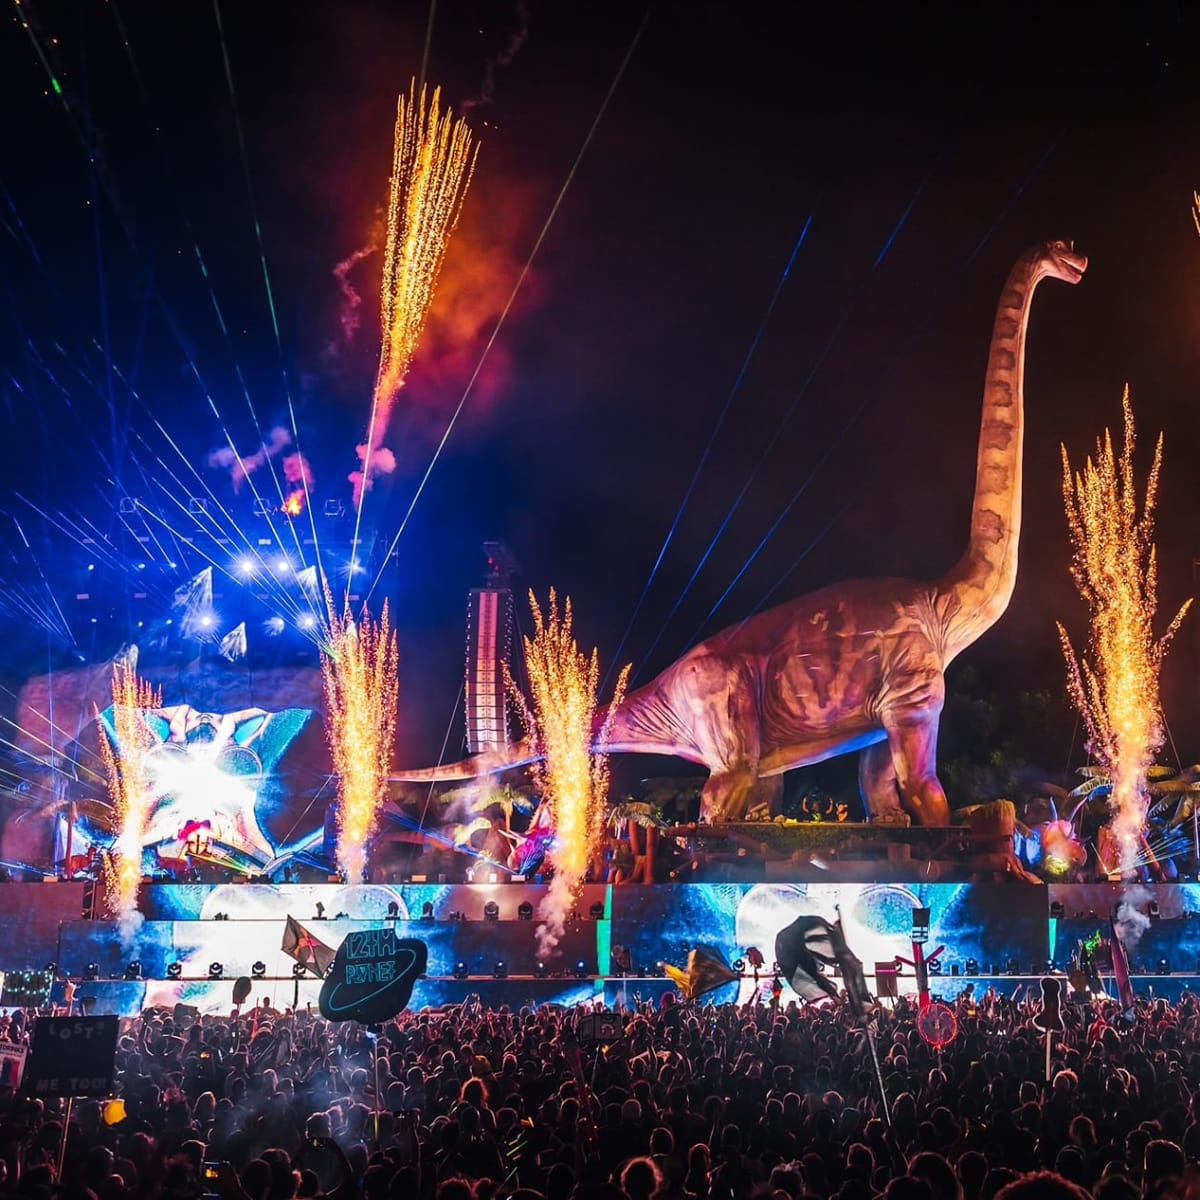 Lost Lands Schedule 2022 Lost Lands To Add New Stage At 2022 Festival - Edm.com - The Latest  Electronic Dance Music News, Reviews & Artists